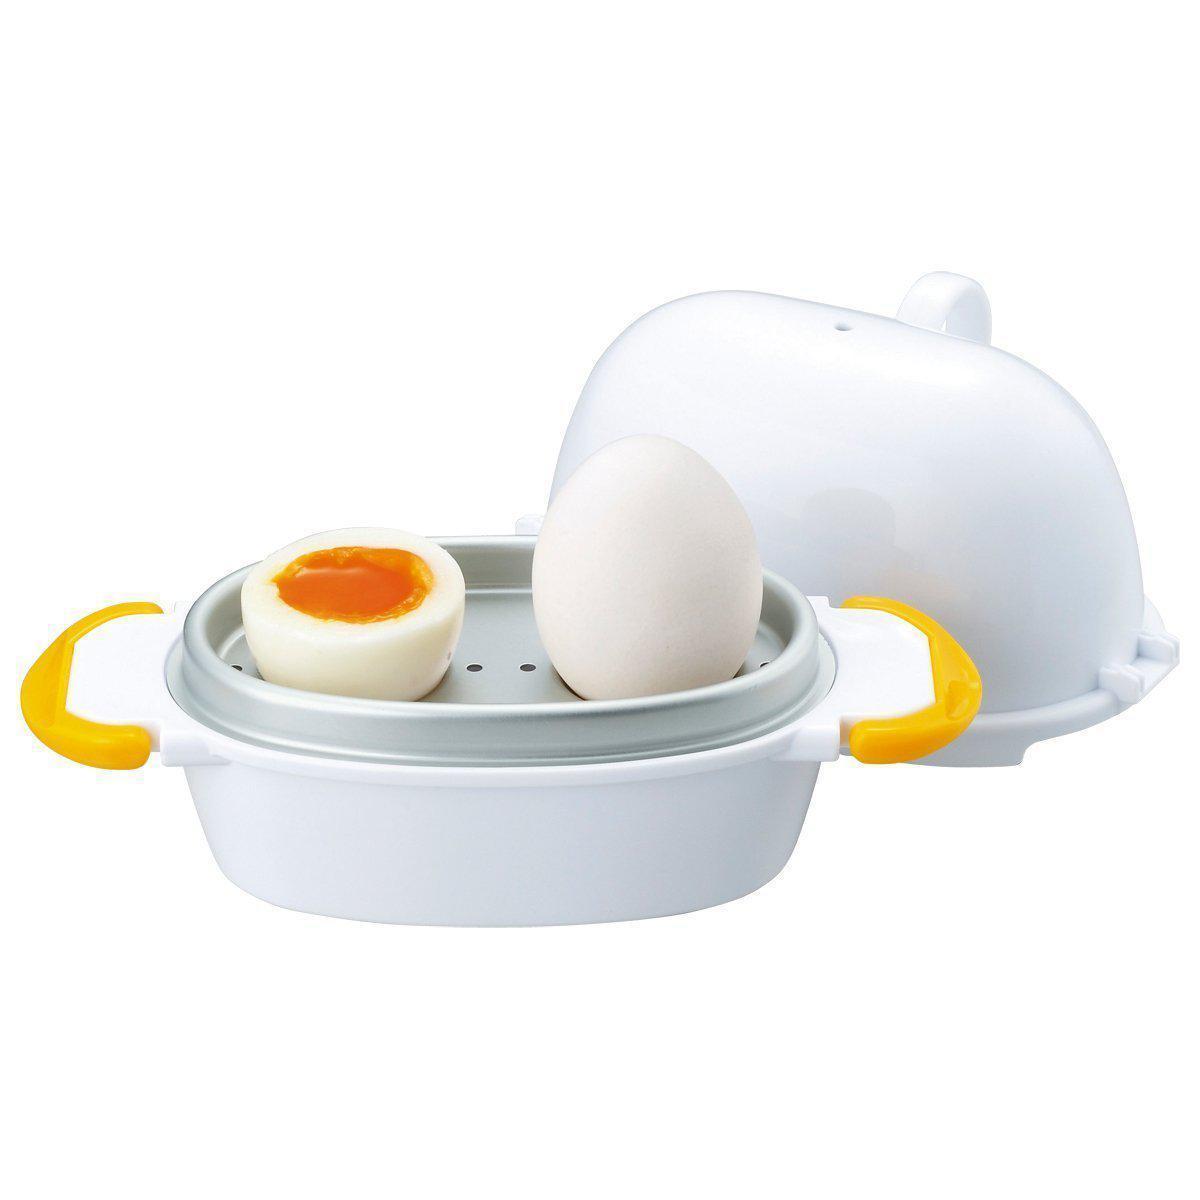 New ! Boiled Egg Maker 2 Pcs RE-277 Easy with Microwave Japan